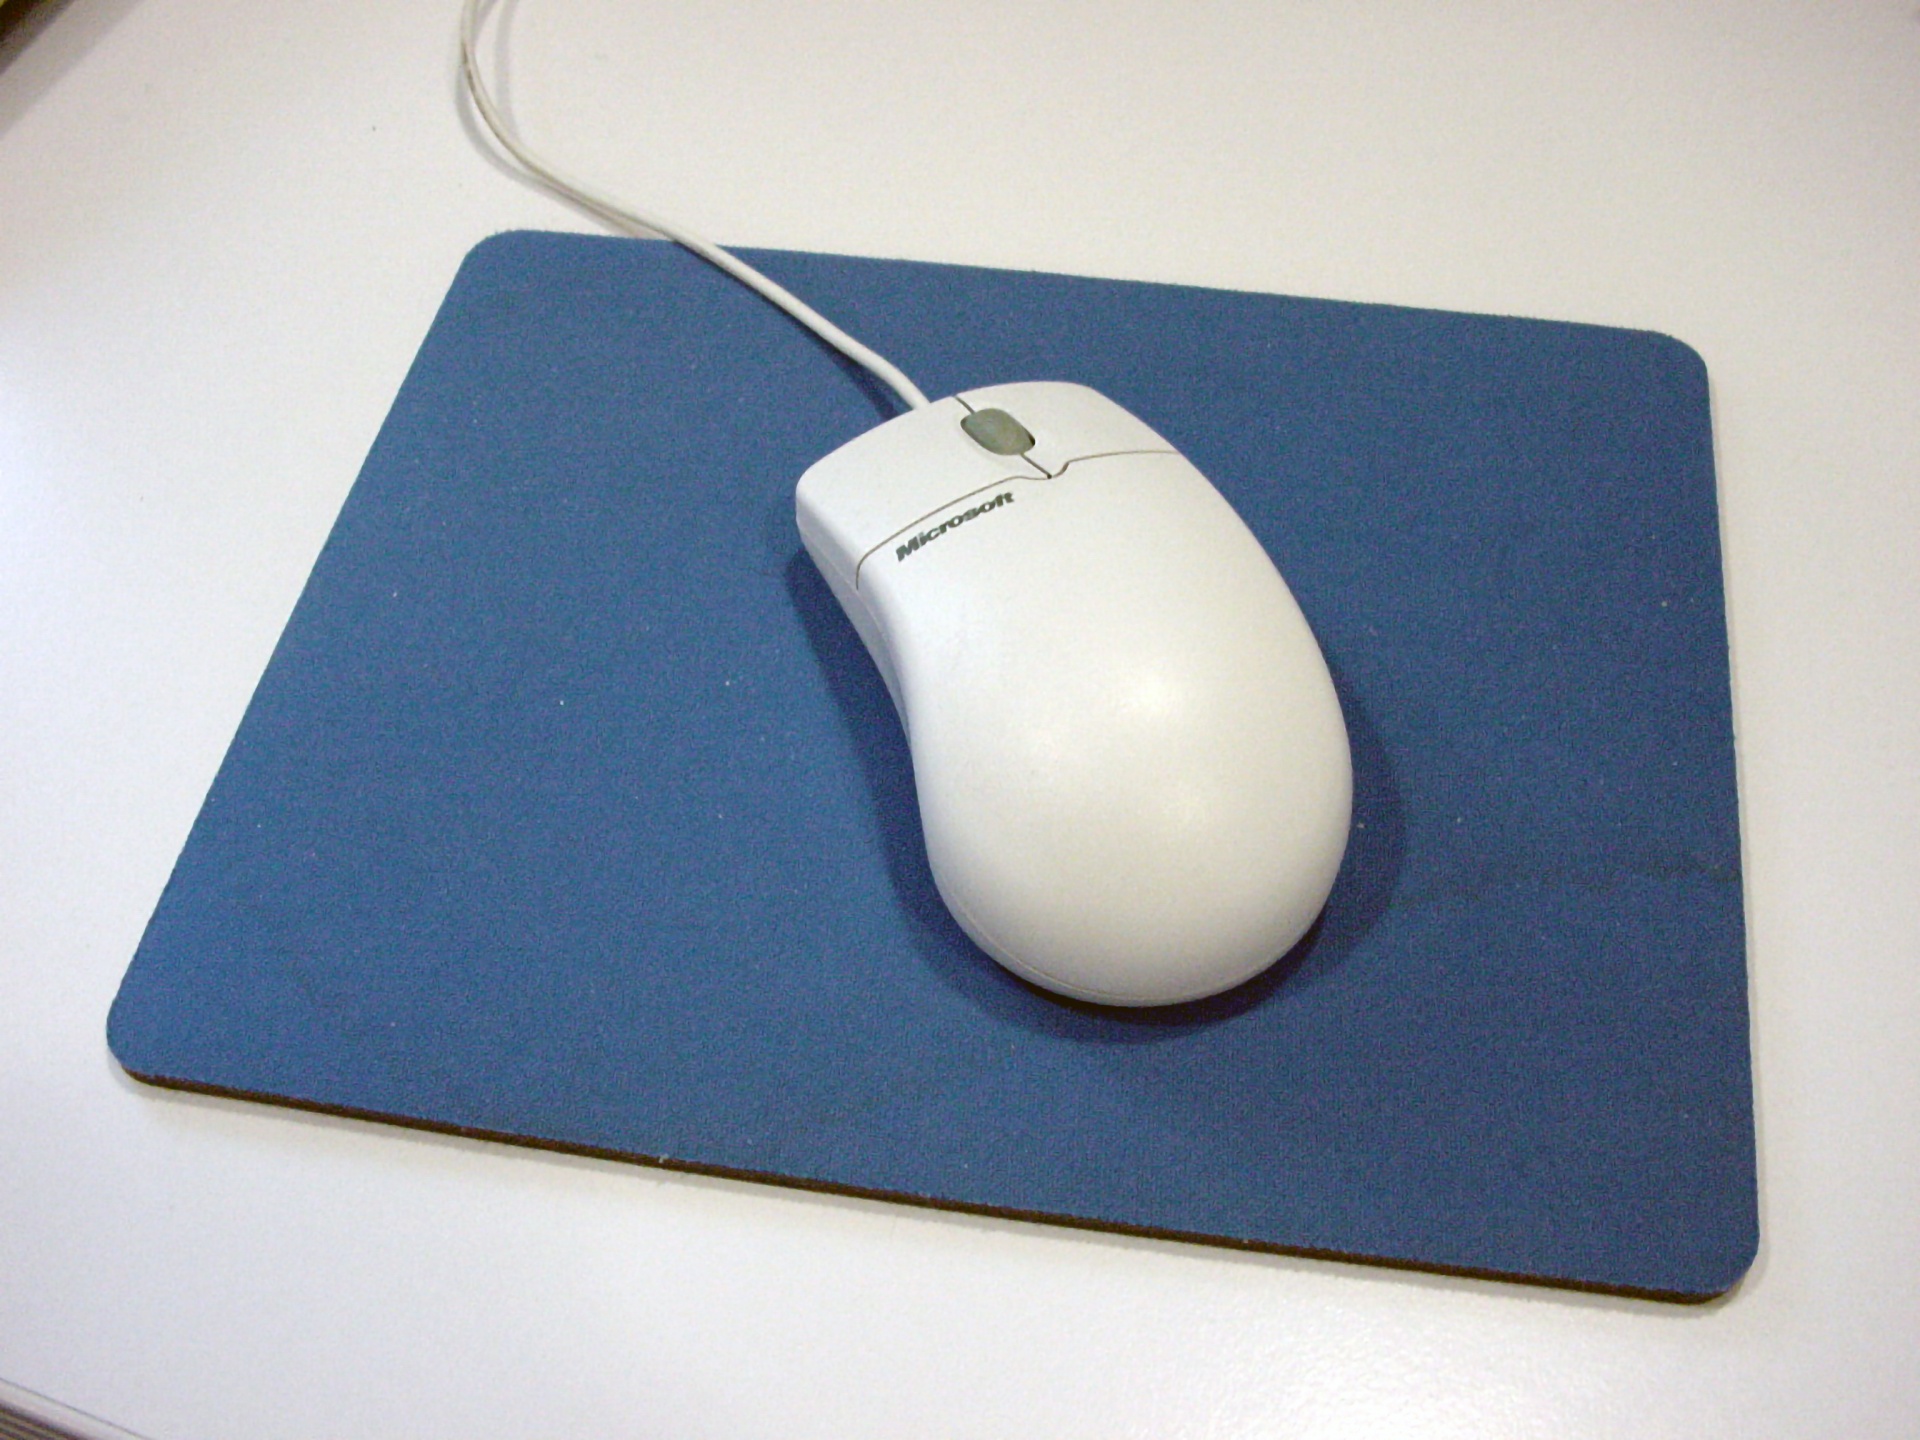 Ranking the best mouse pads for 2022